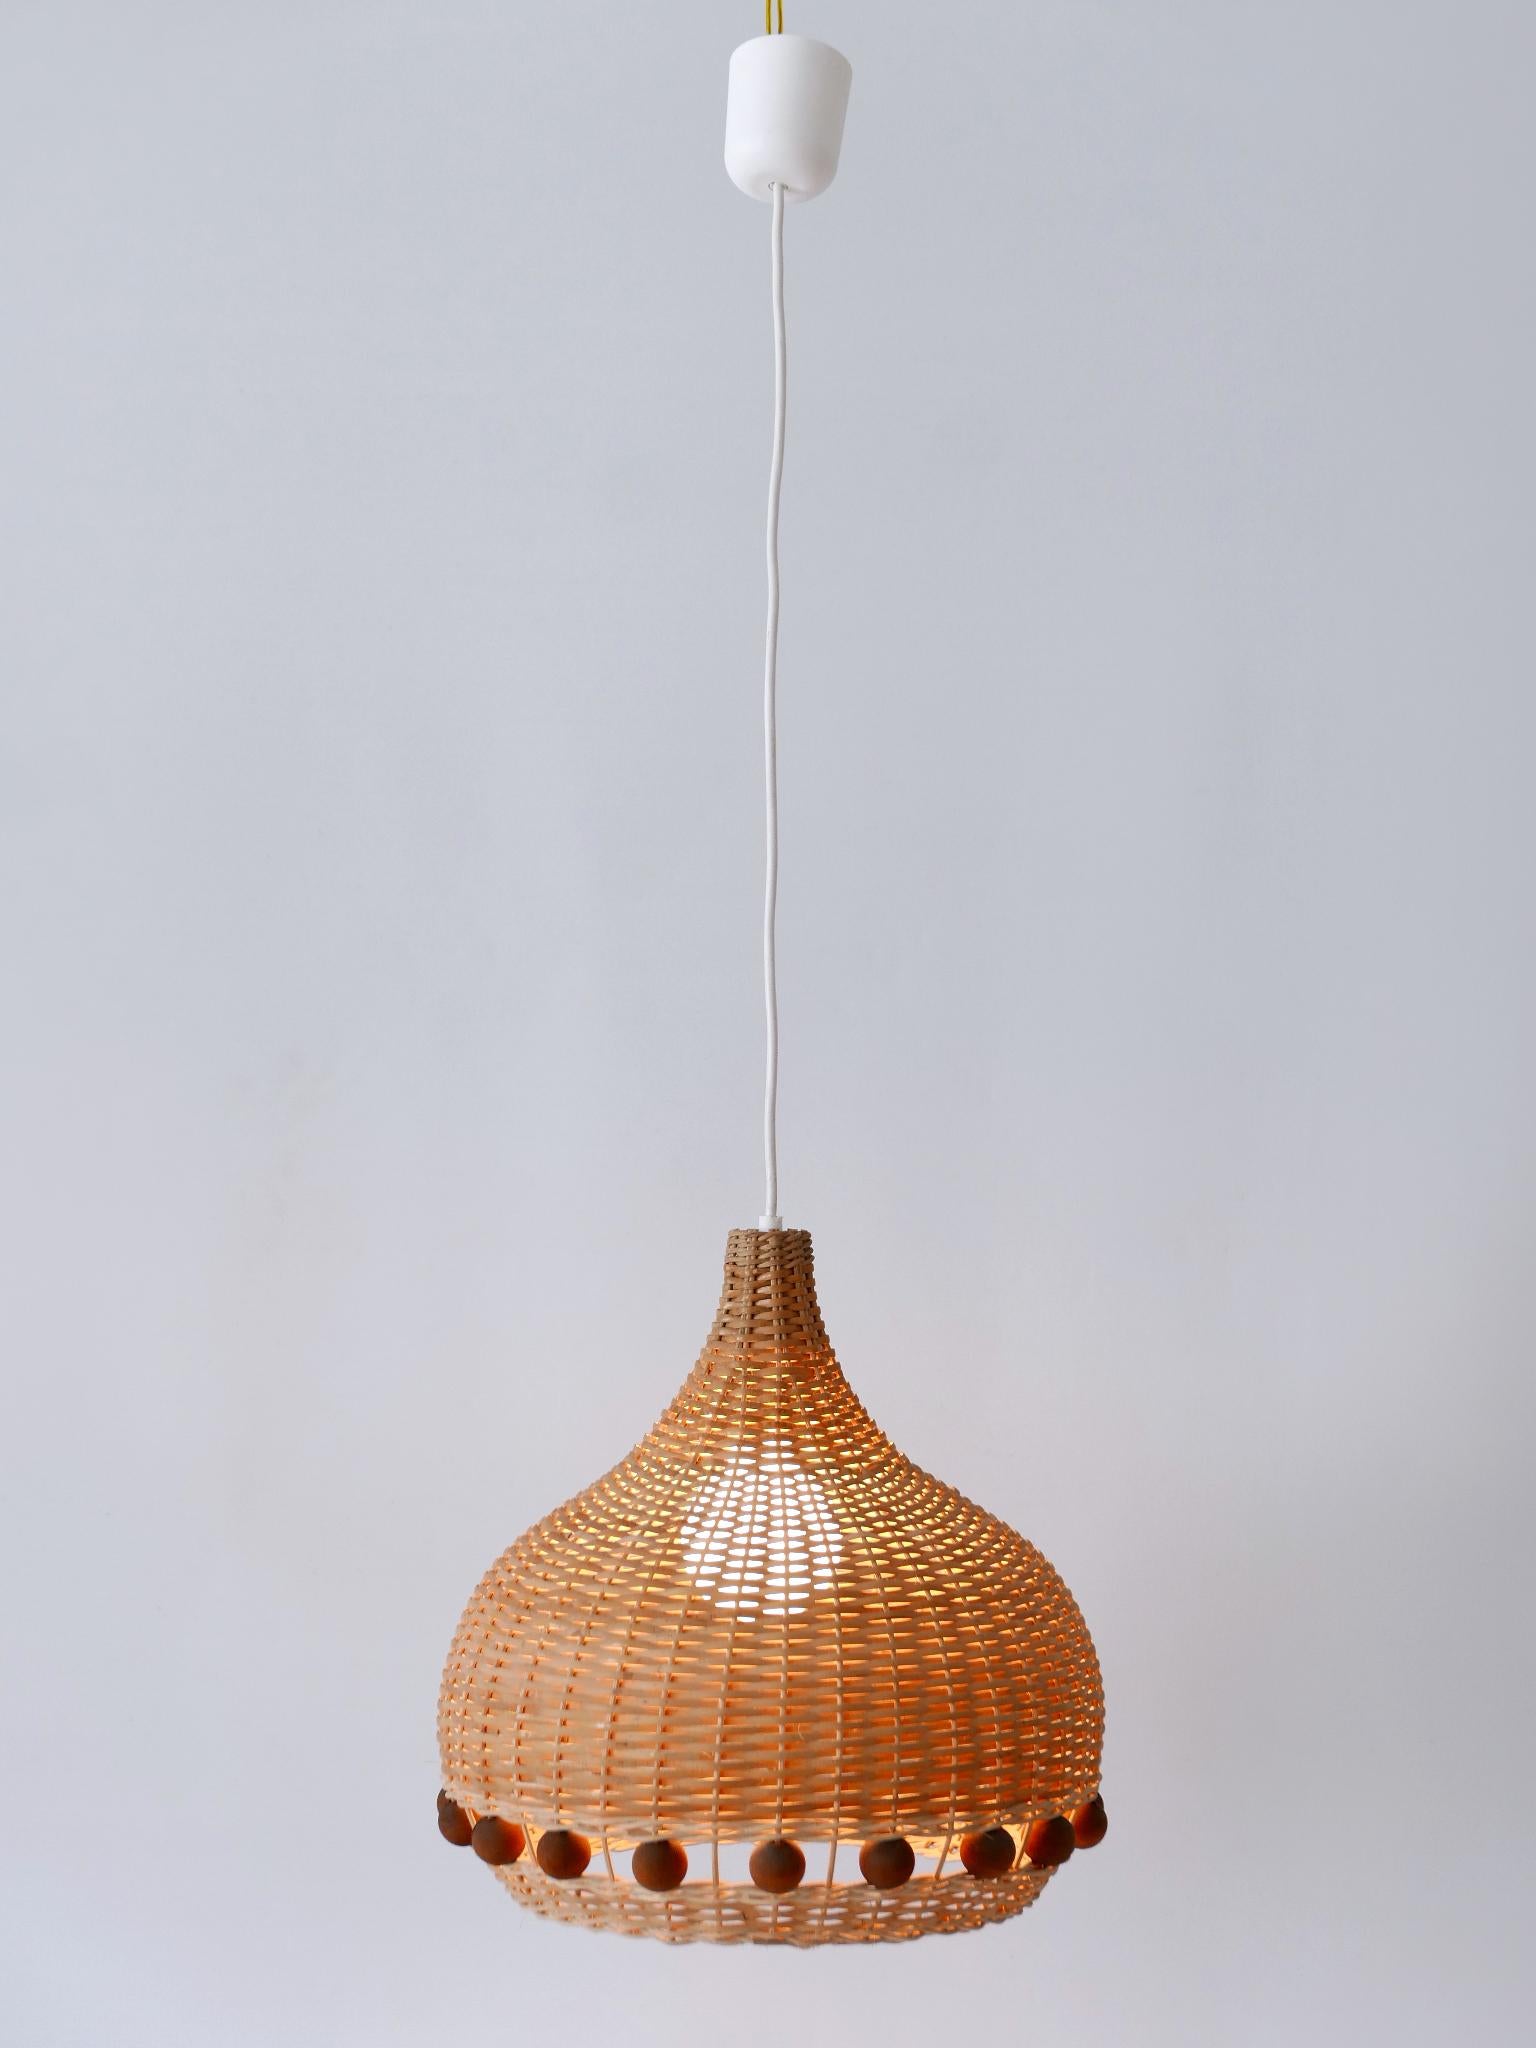 Lovely & highly decorative Mid-Century Modern rattan tulip pendant lamp or hanging light. Designed & manufactured in Germany, 1960s.

Executed in rattan and wood ball elements, the pendant lamp comes with 1 x E27 / E26 Edison screw fit bulb socket,